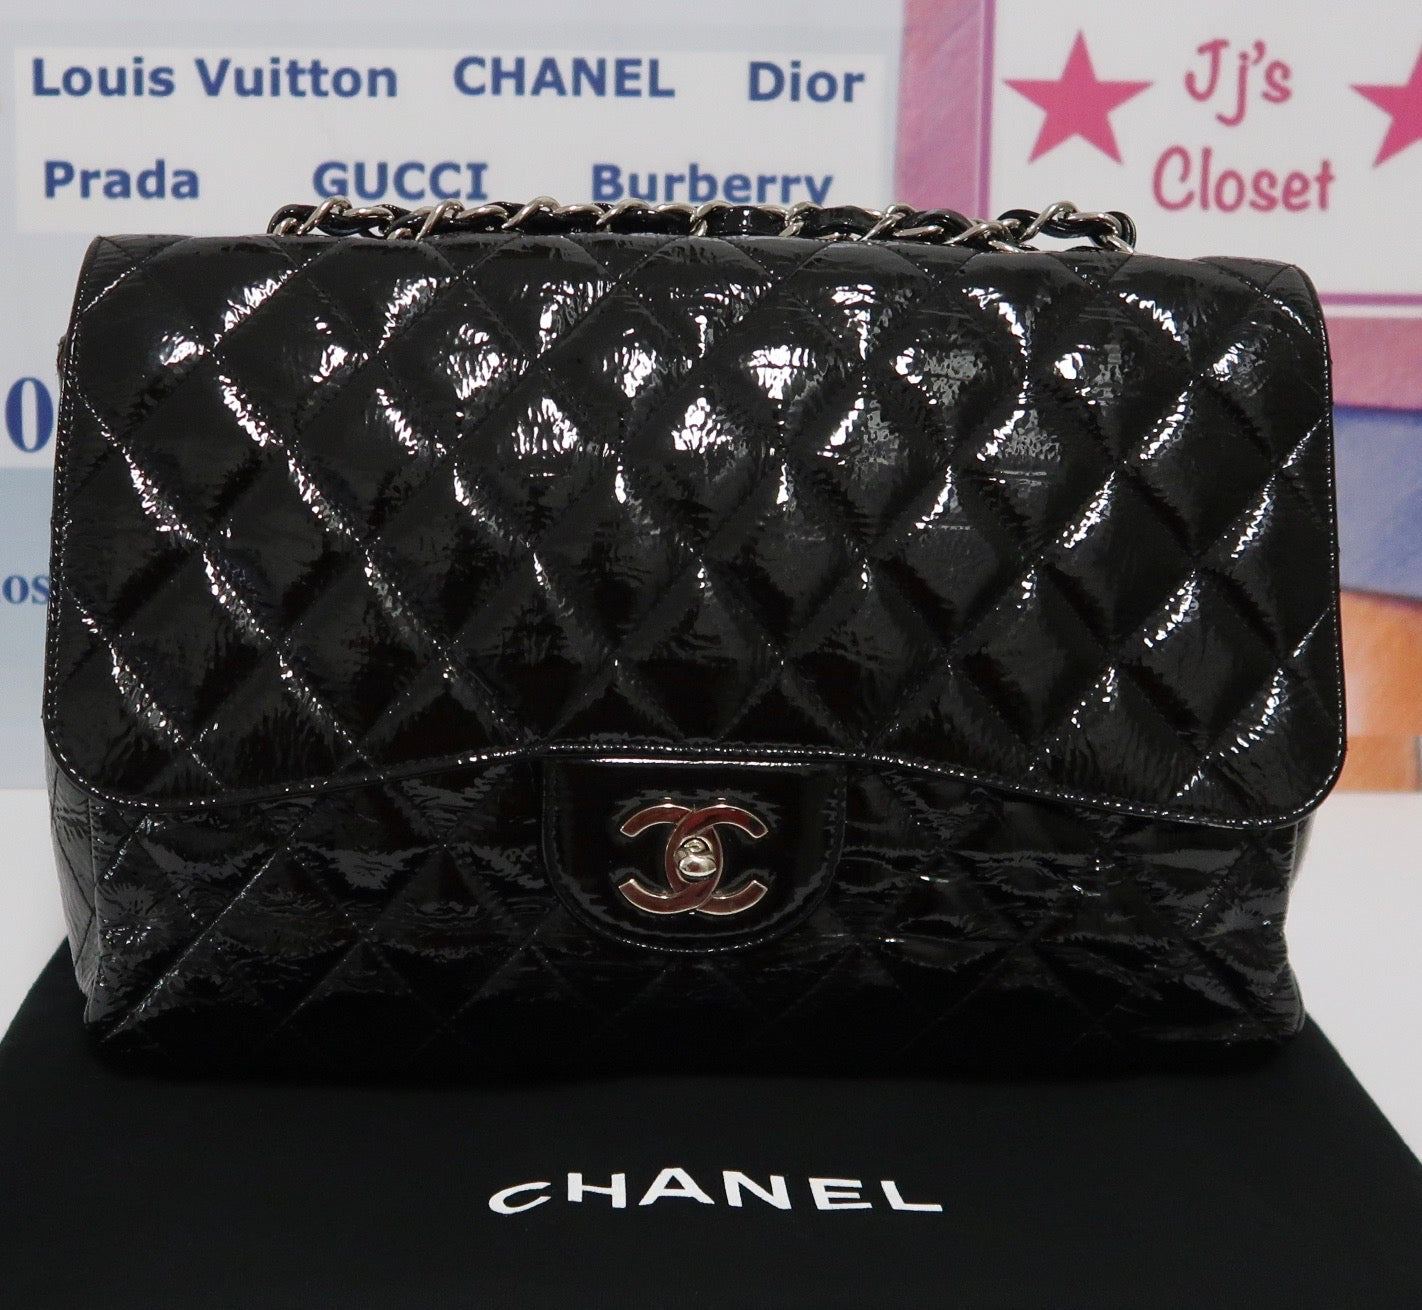 How To Know That Your Chanel Bag Is Authentic – HG Bags Online